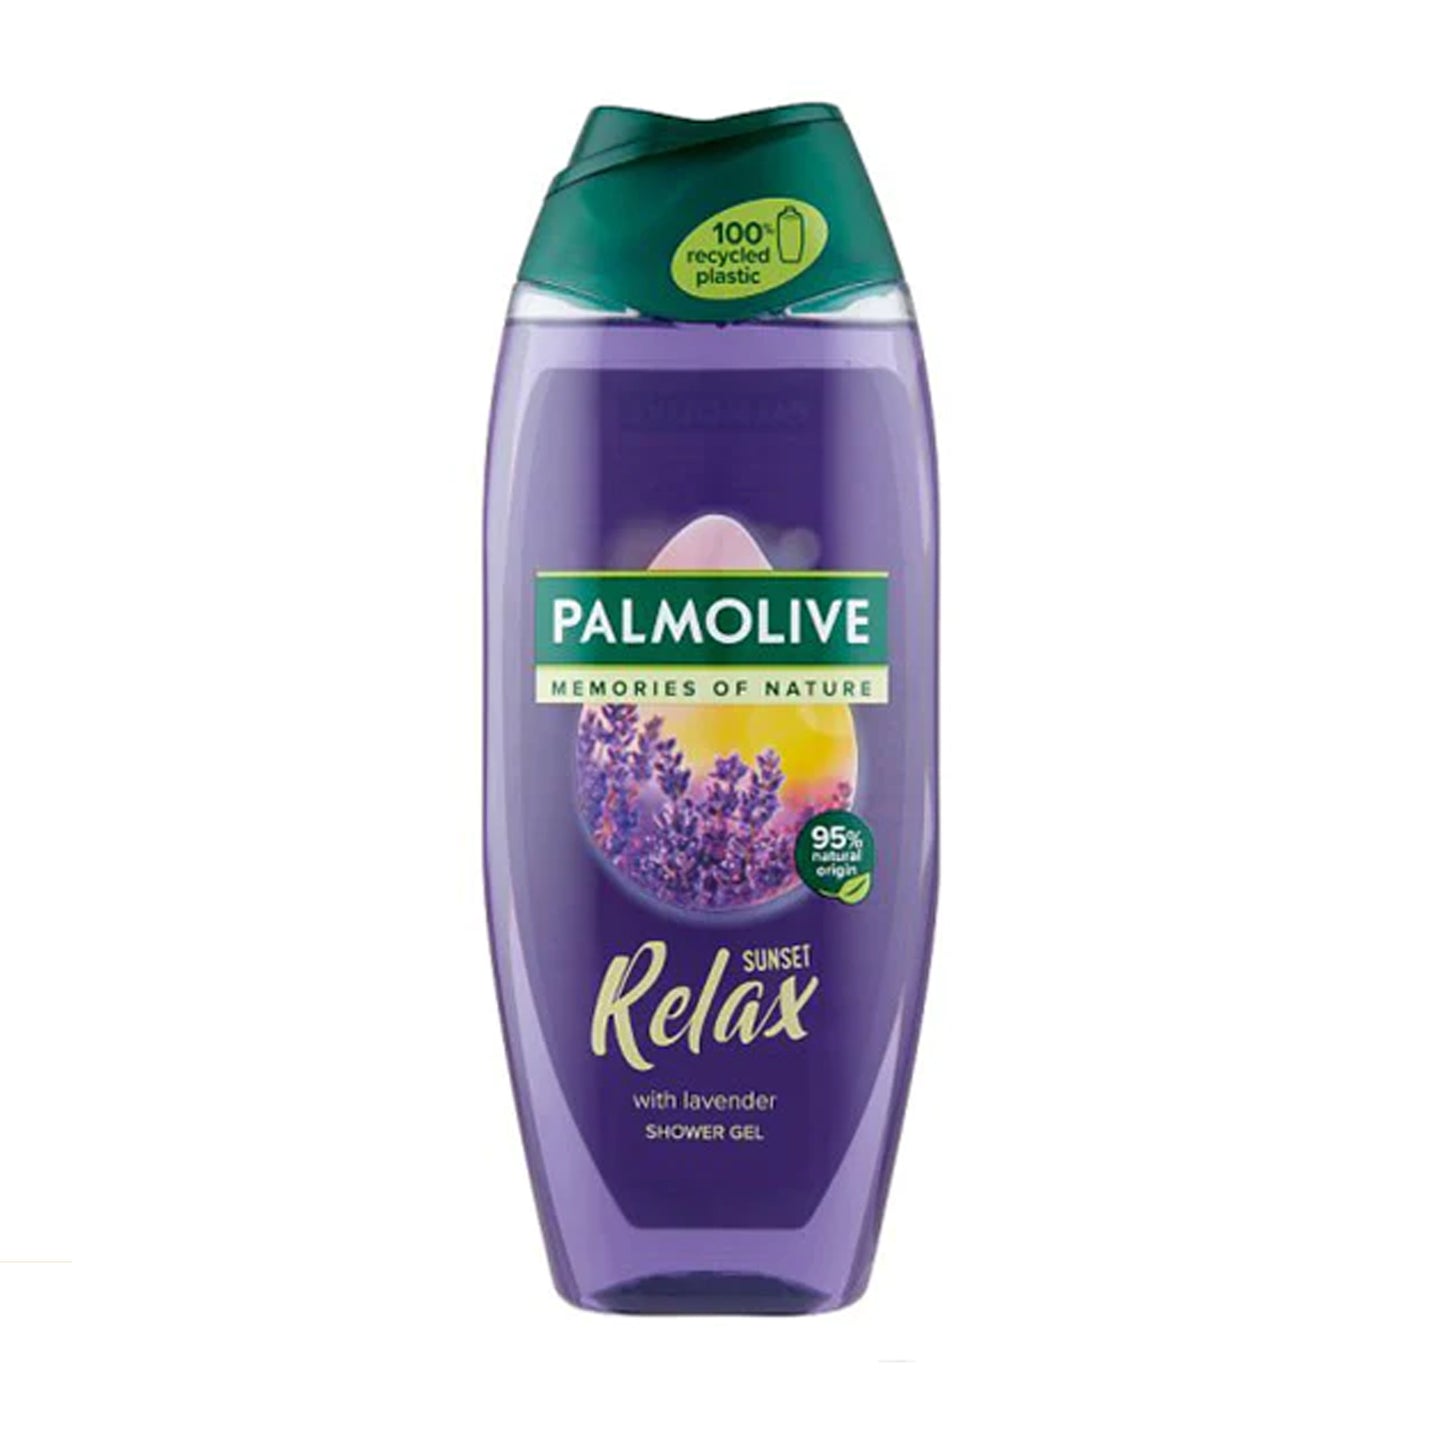 PALMOLIVE - SUNSET RELAX WITH LAVENDER SHOWER GEL - 250ML